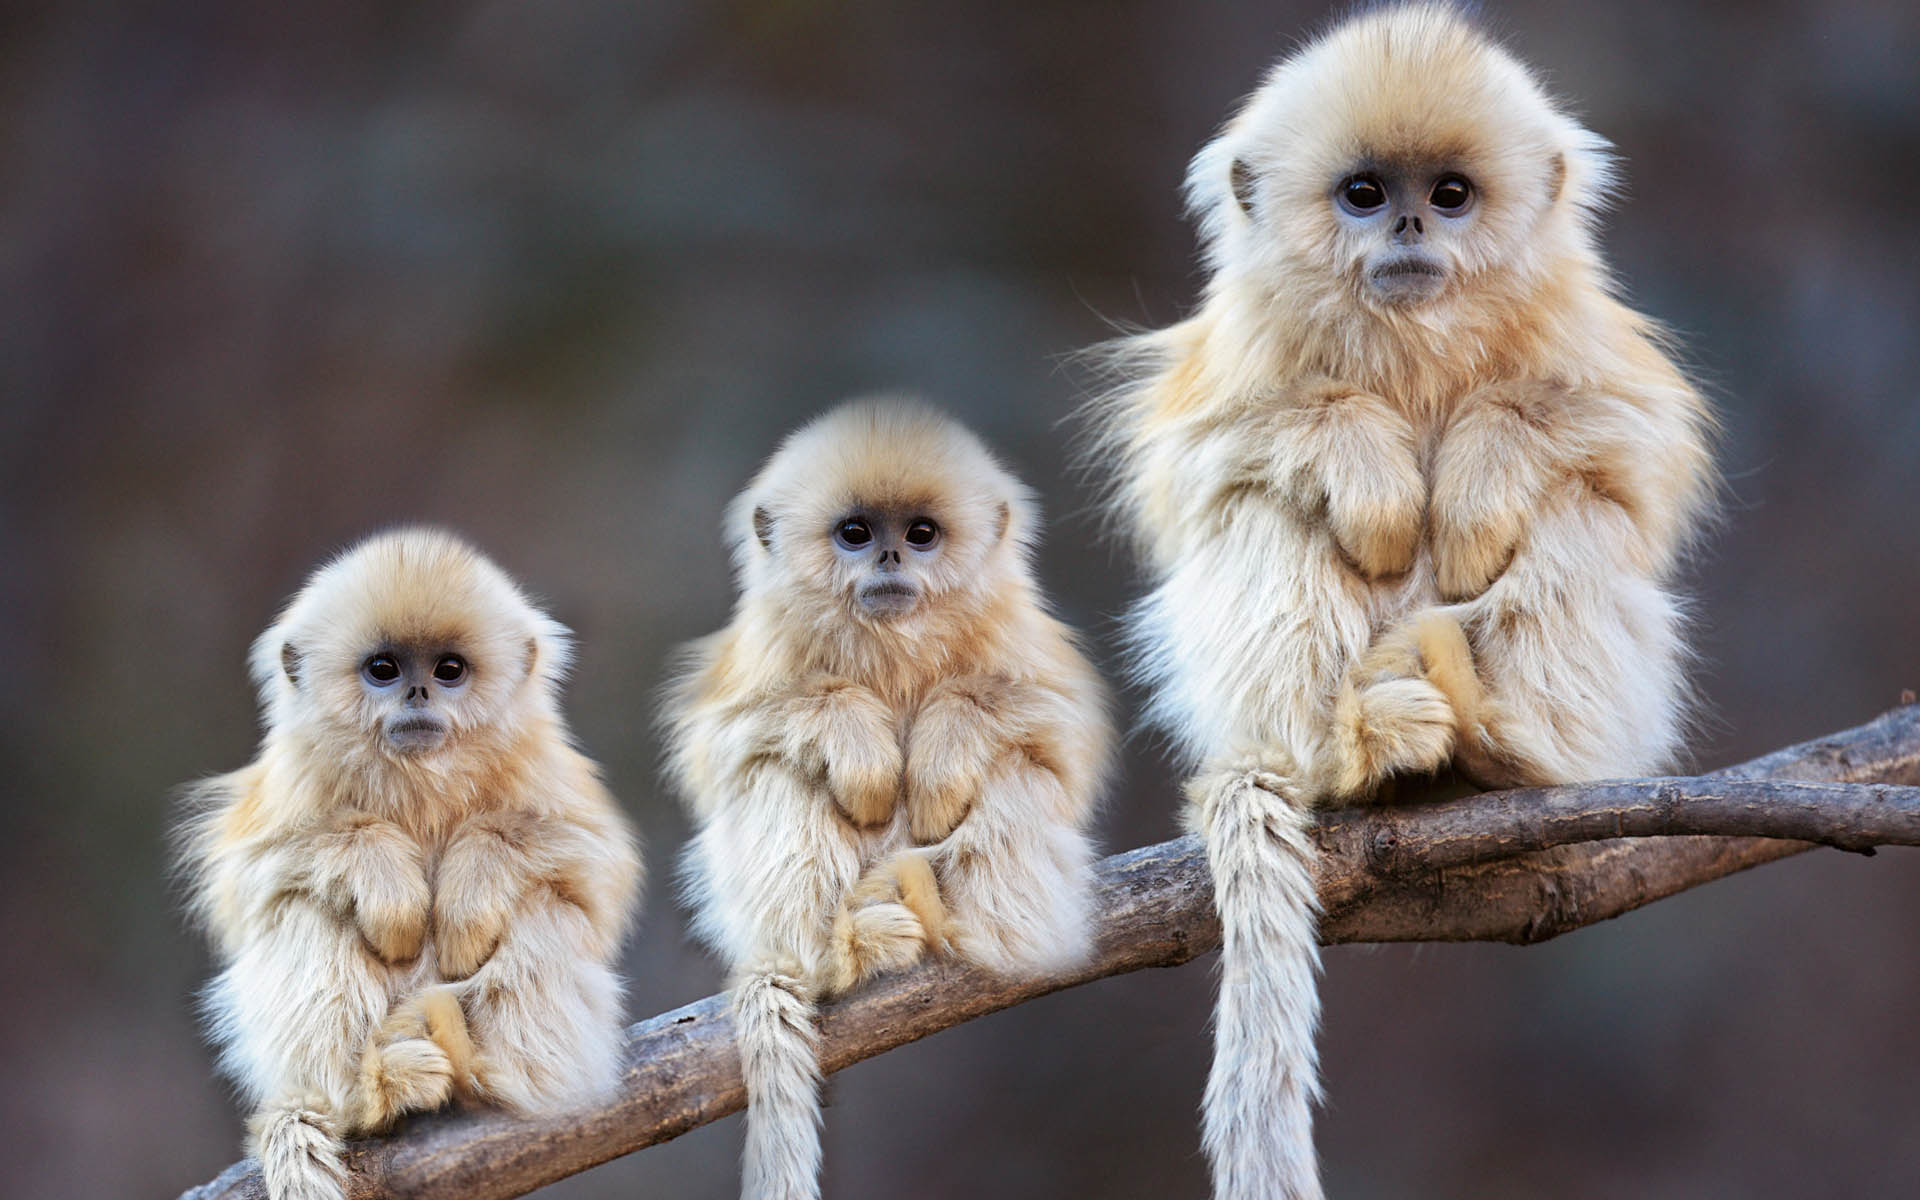 Monkey Wallpapers Hd Images Live Hd Wallpaper Hq Pictures - Cutest Monkey Breed , HD Wallpaper & Backgrounds